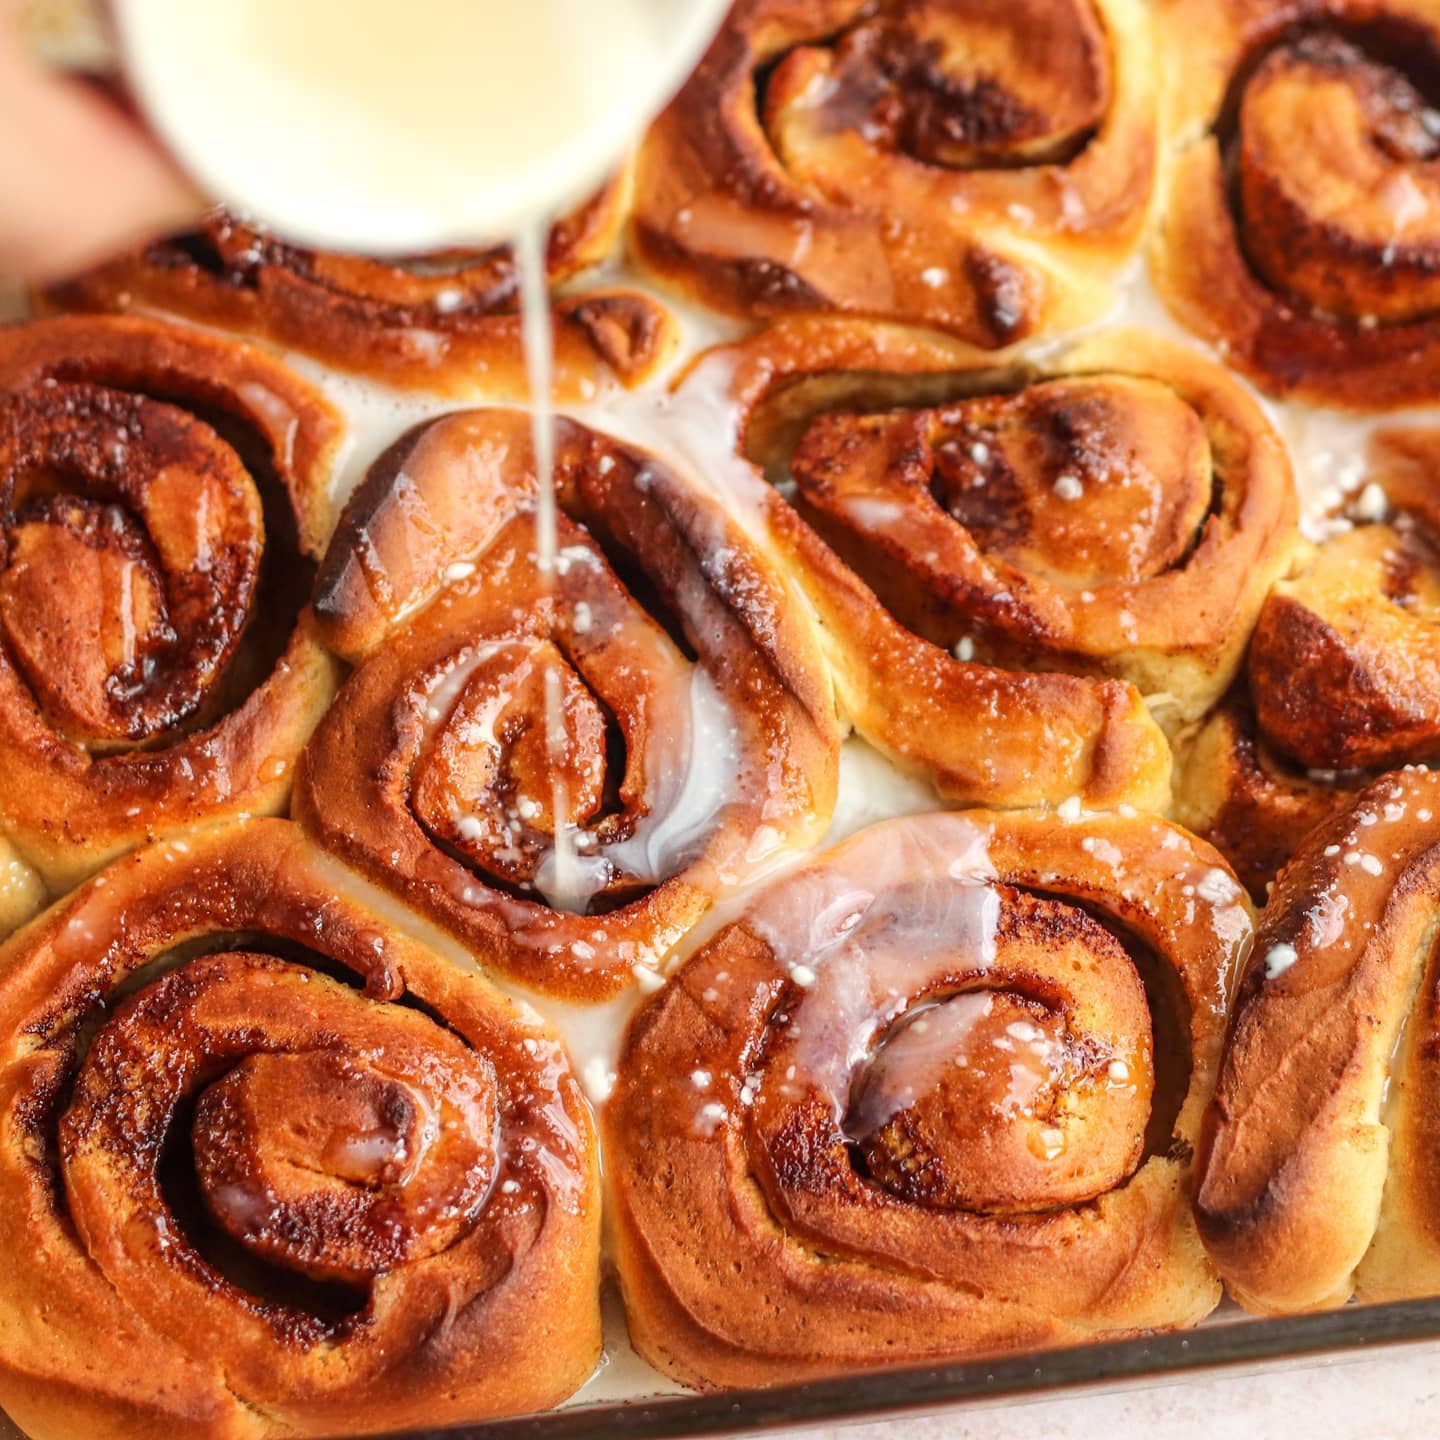 Homemade Cinnamon Buns with Cream Cheese Topping